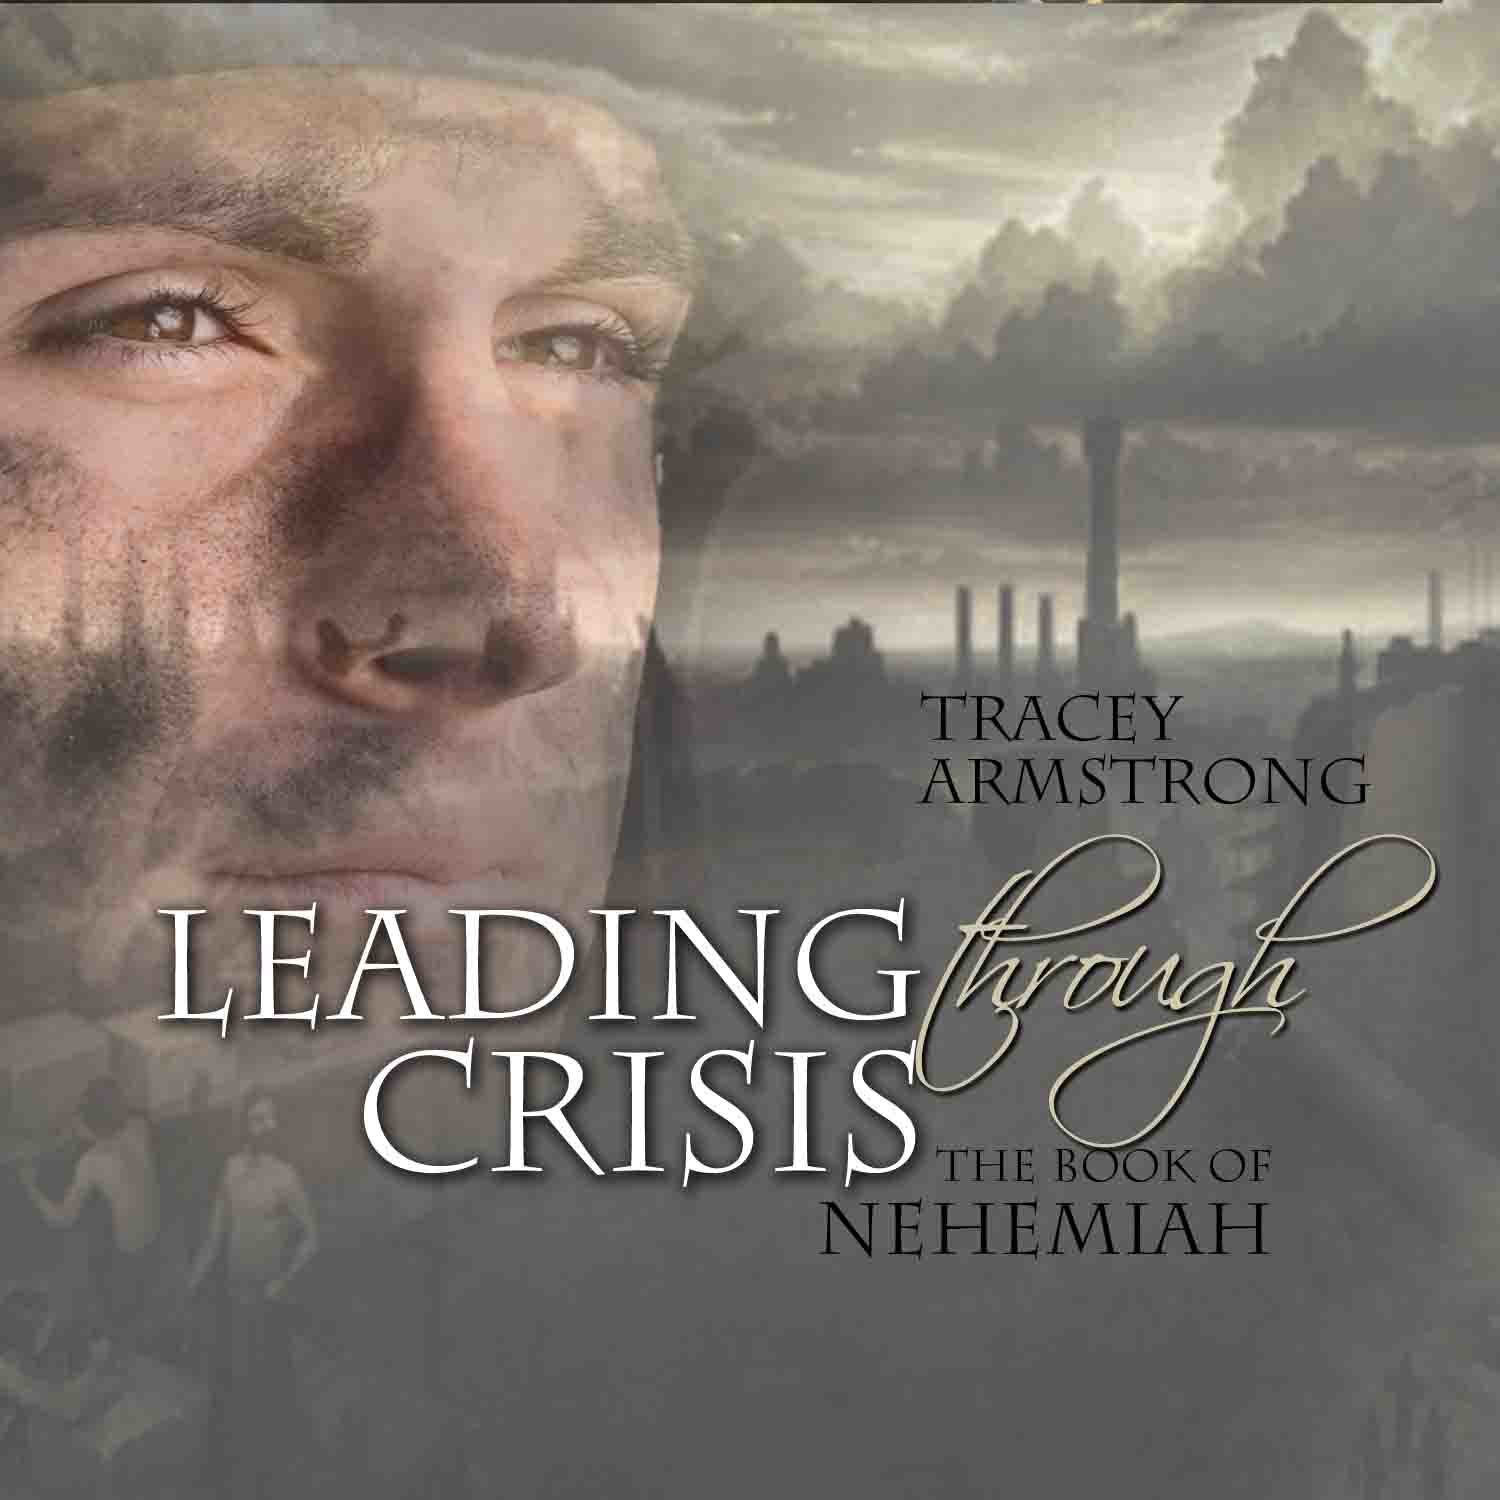 Leading Through Crisis (from the book of Nehemiah) Set 3 (Download)